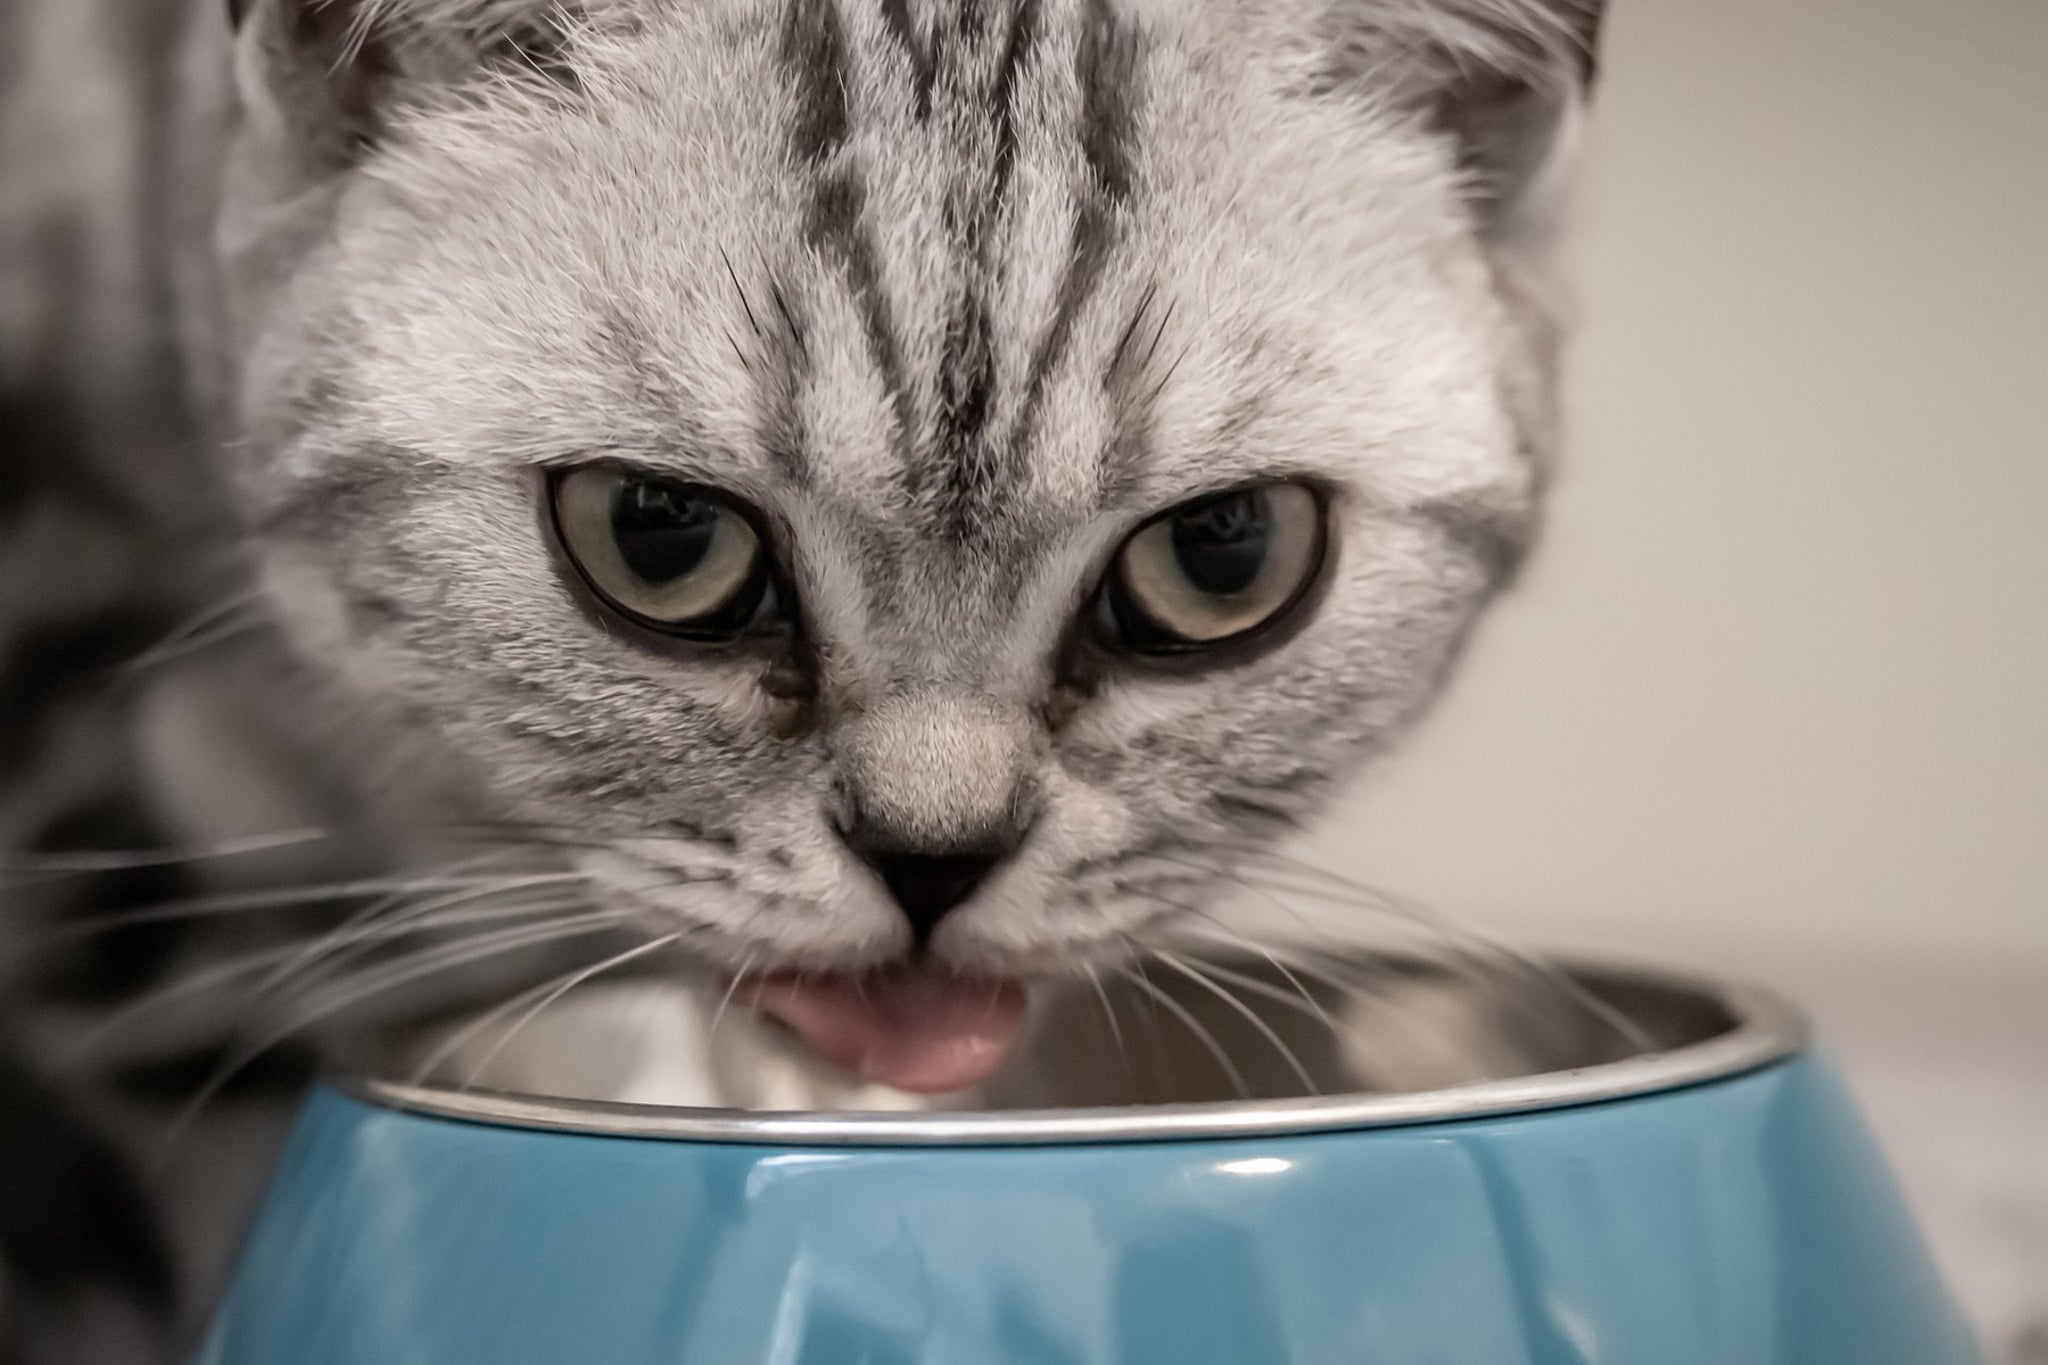 083_cat_eating_out_of_bowl.jpg